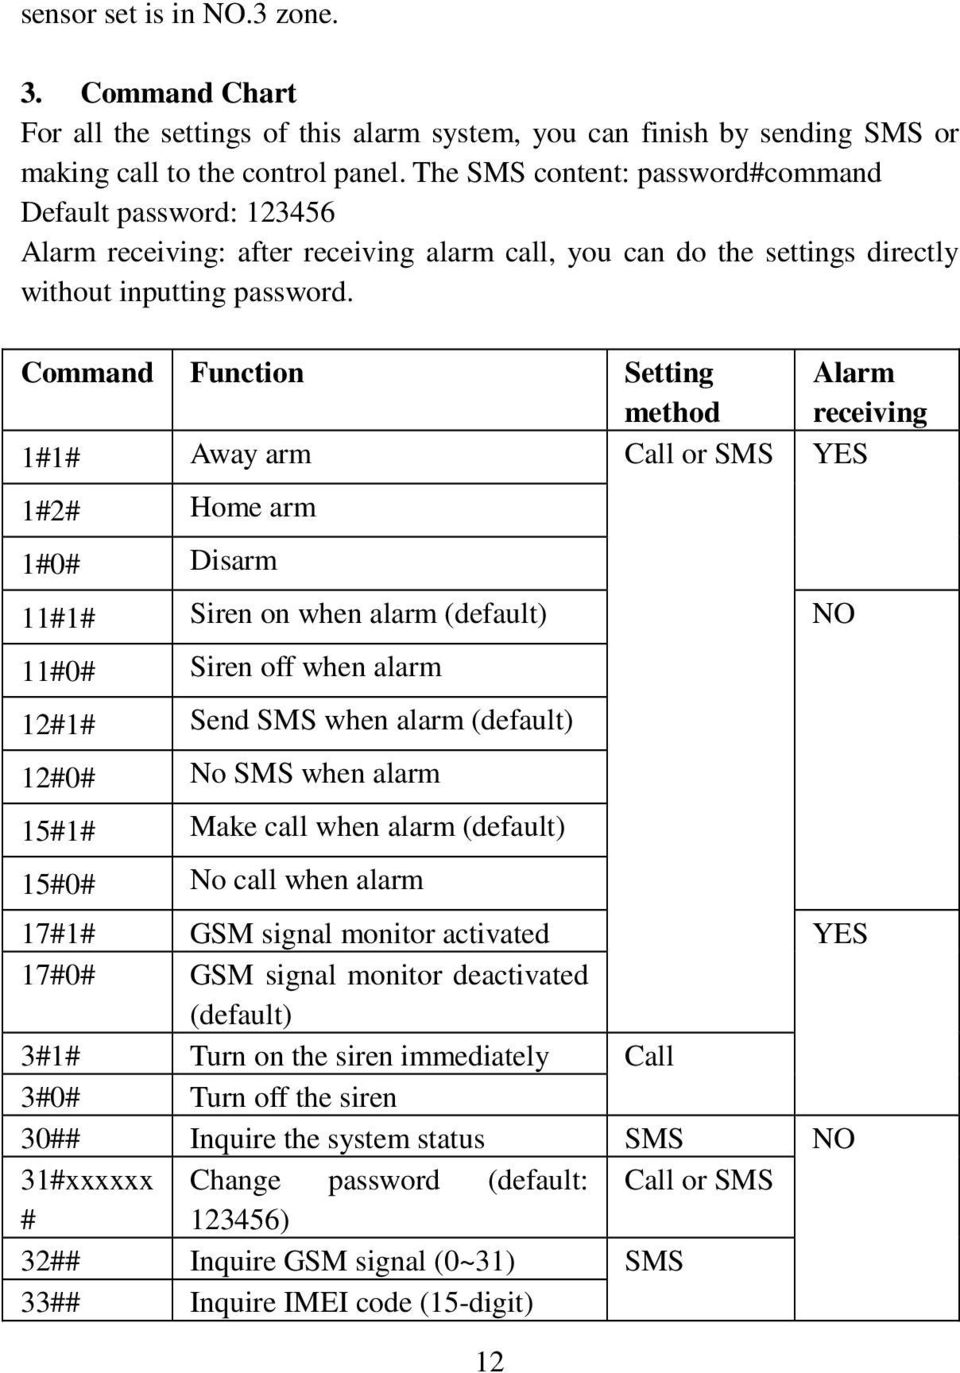 Command Function Setting Alarm method receiving 1#1# Away arm Call or SMS YES 1#2# Home arm 1#0# Disarm 11#1# Siren on when alarm (default) NO 11#0# Siren off when alarm 12#1# Send SMS when alarm